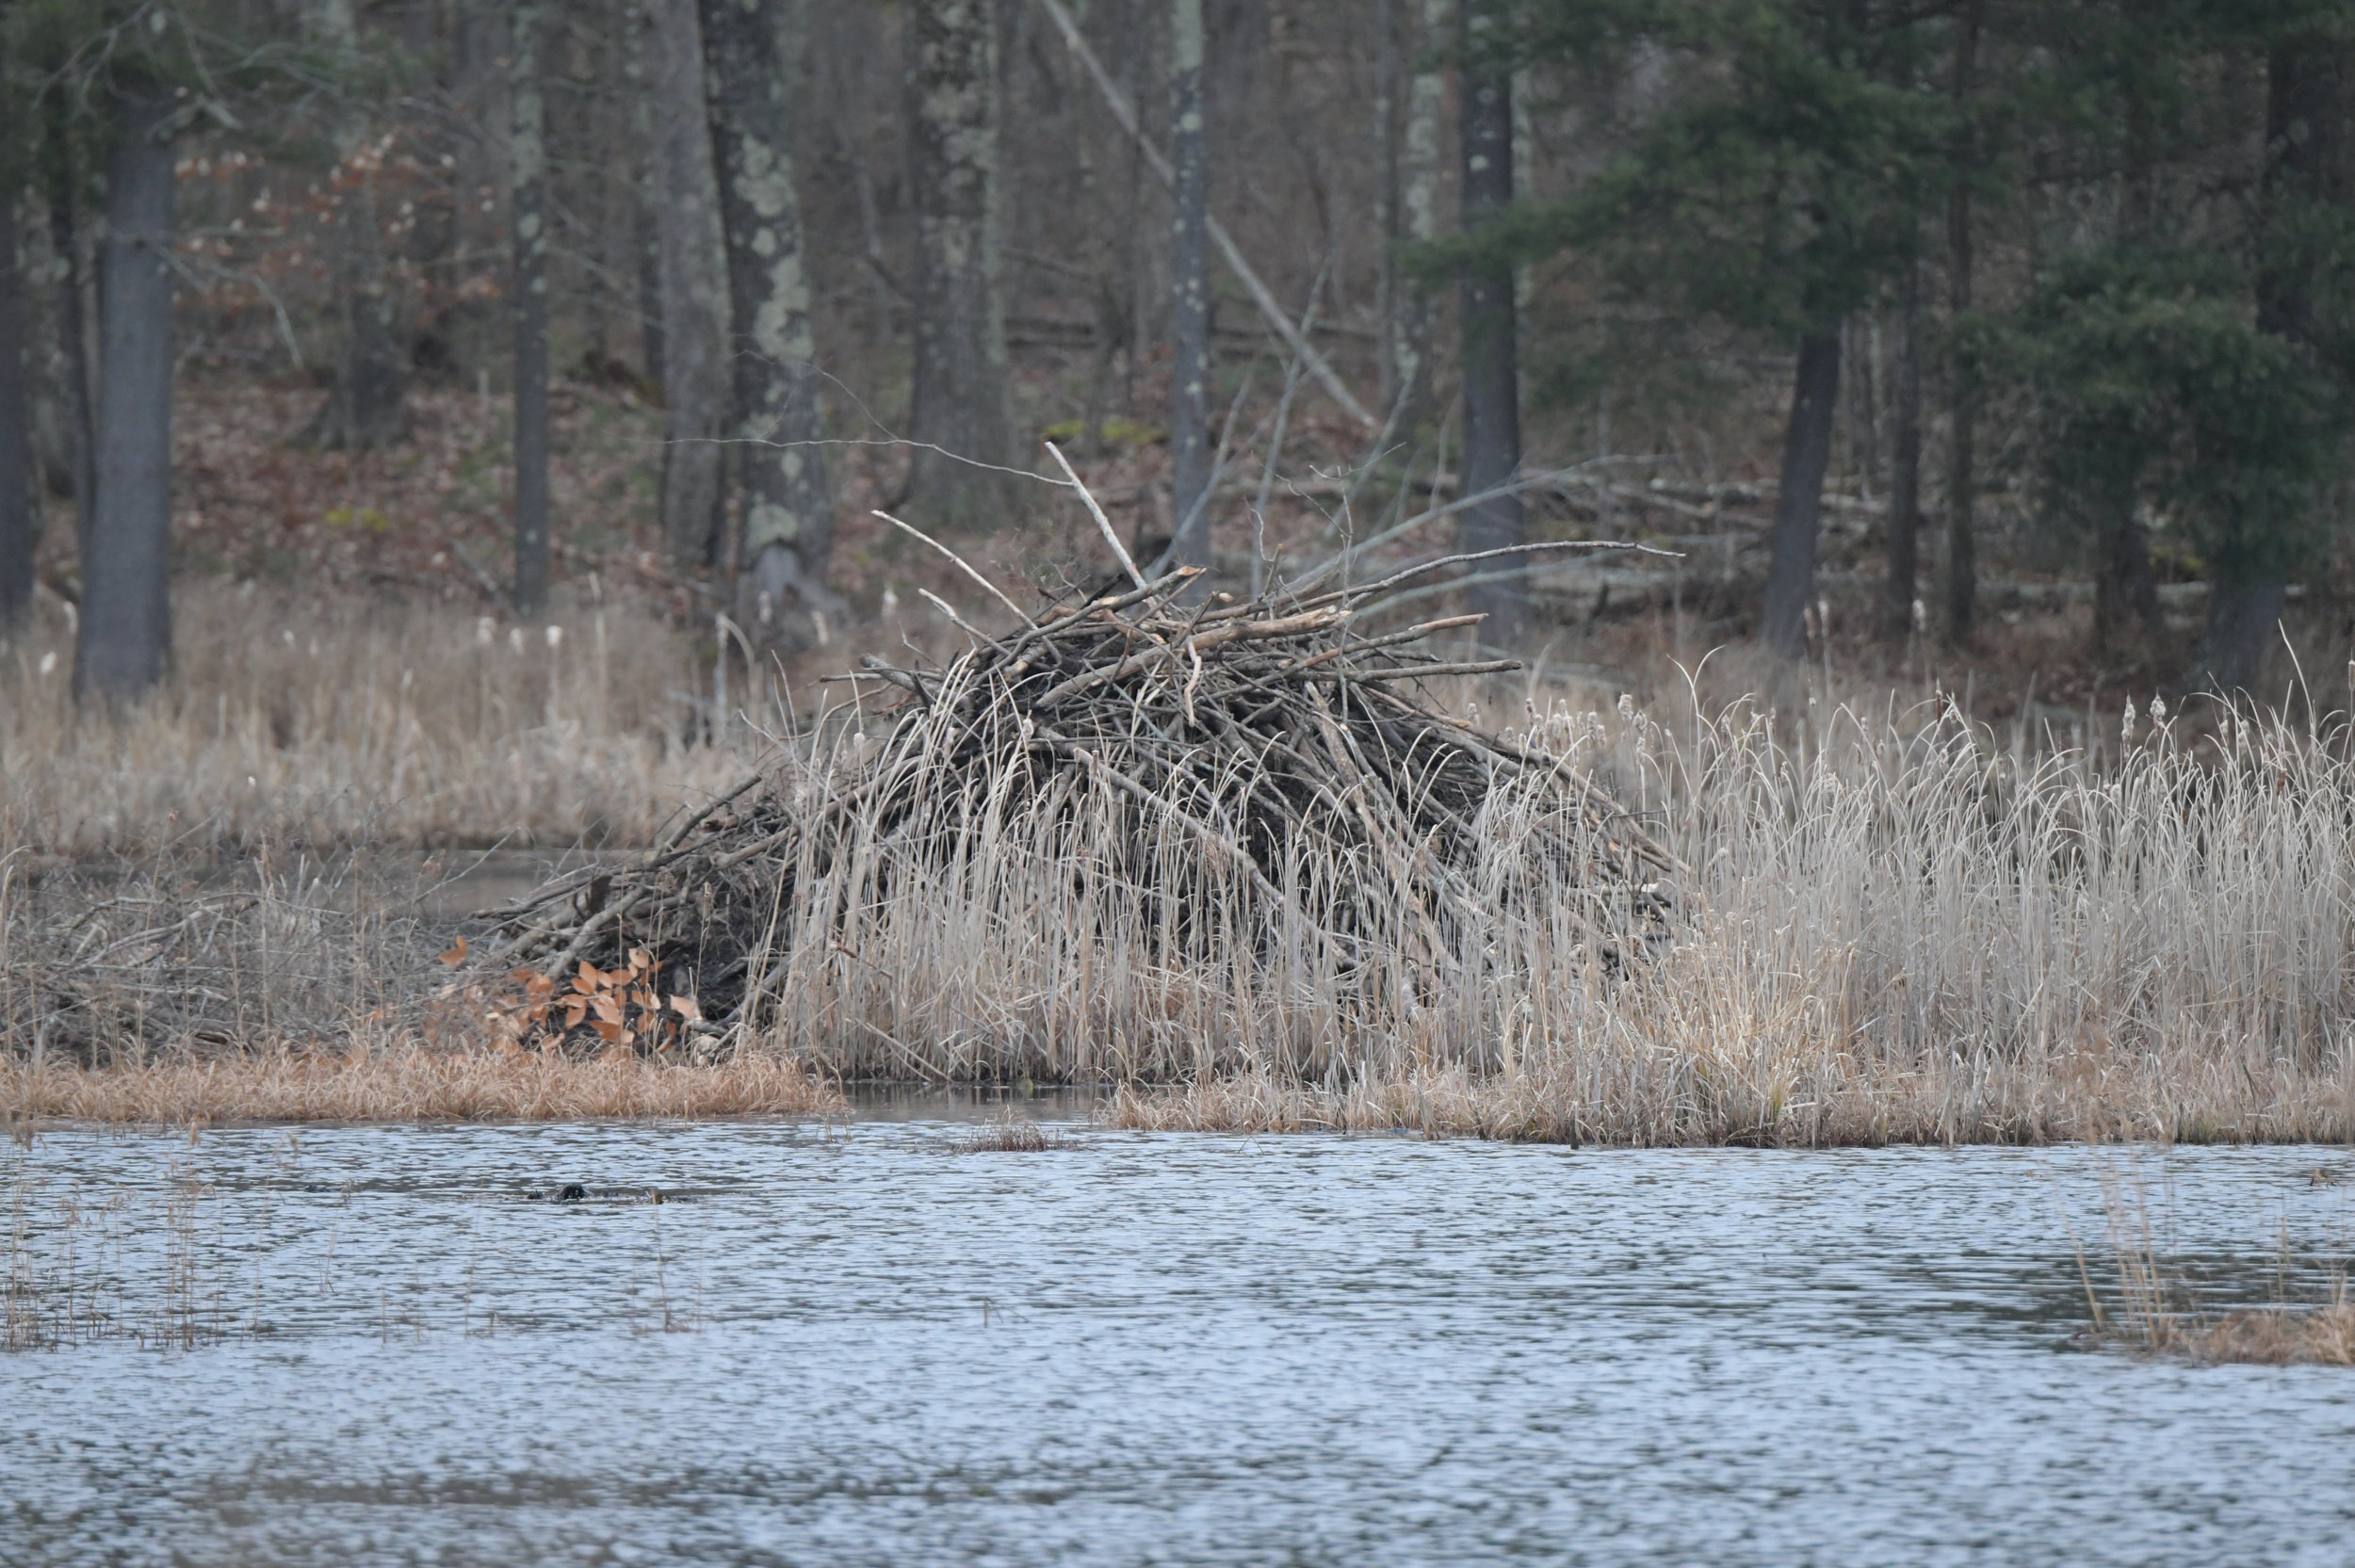   All the beavers hard work all fall will keep them warm and dry through the winter months.&nbsp; I have been watching and filming thee beavers for over three years and they know how to do it !!&nbsp;&nbsp;  